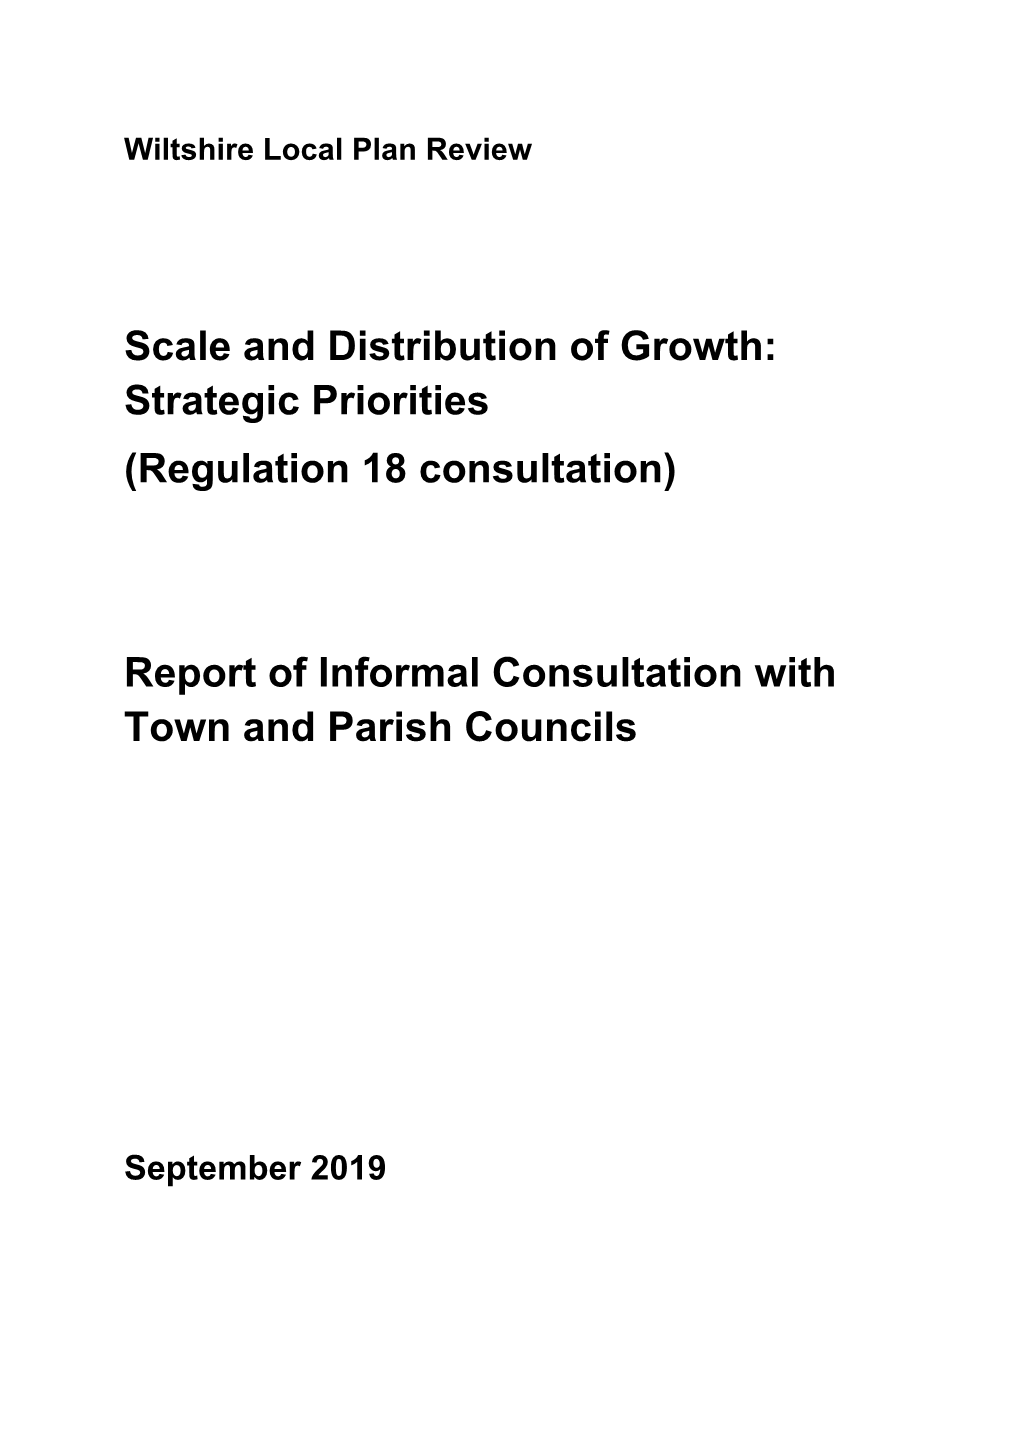 Scale and Distribution of Growth: Strategic Priorities (Regulation 18 Consultation)